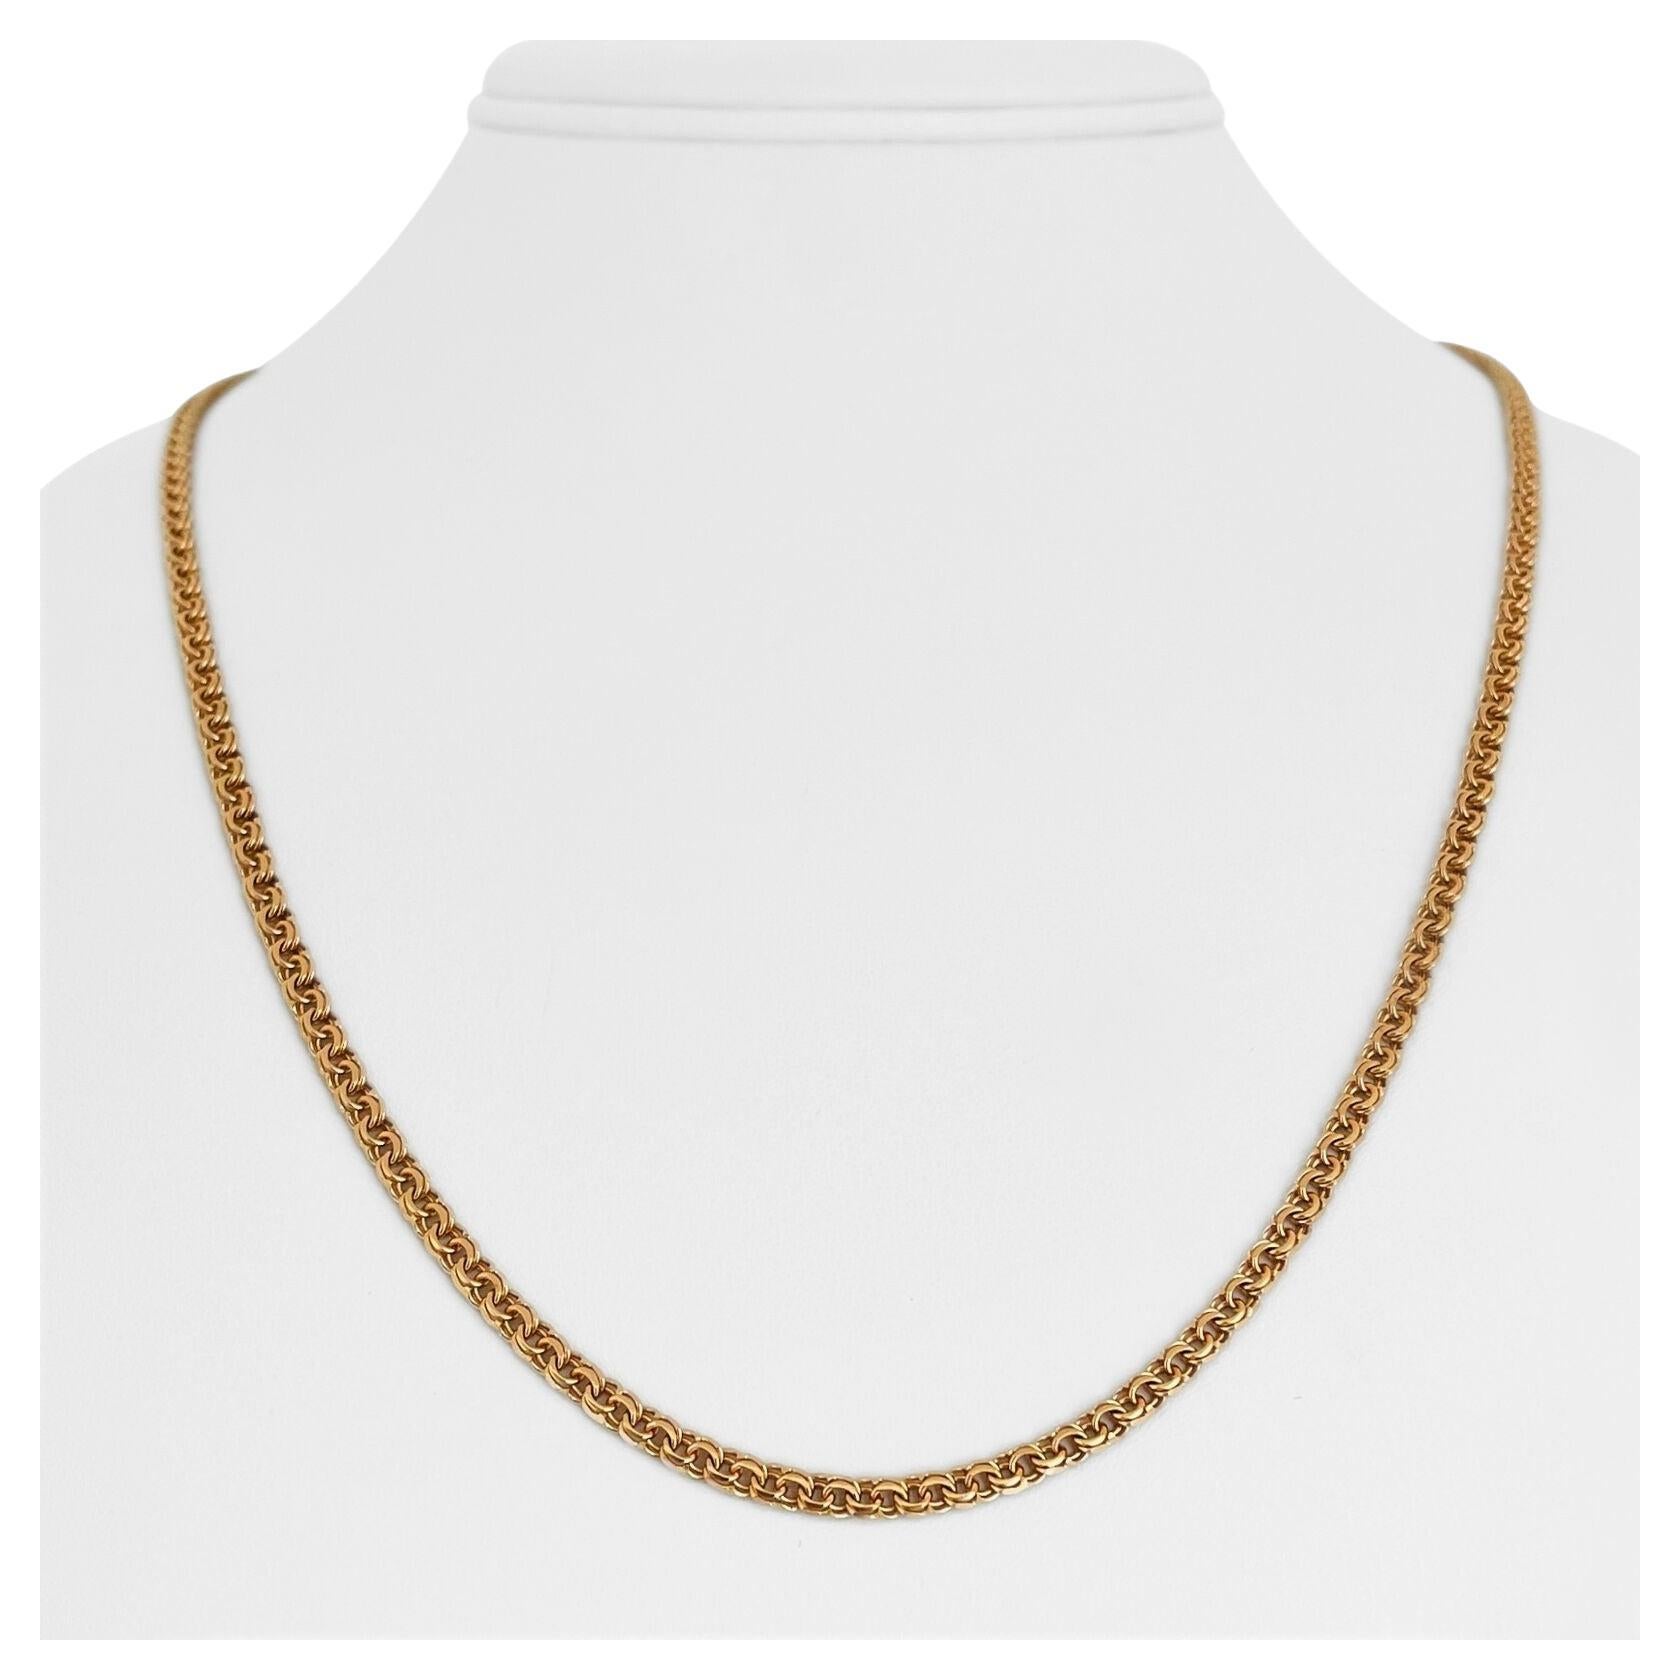 19 Karat Portuguese Yellow Gold Solid Double Curb Link Chain Necklace